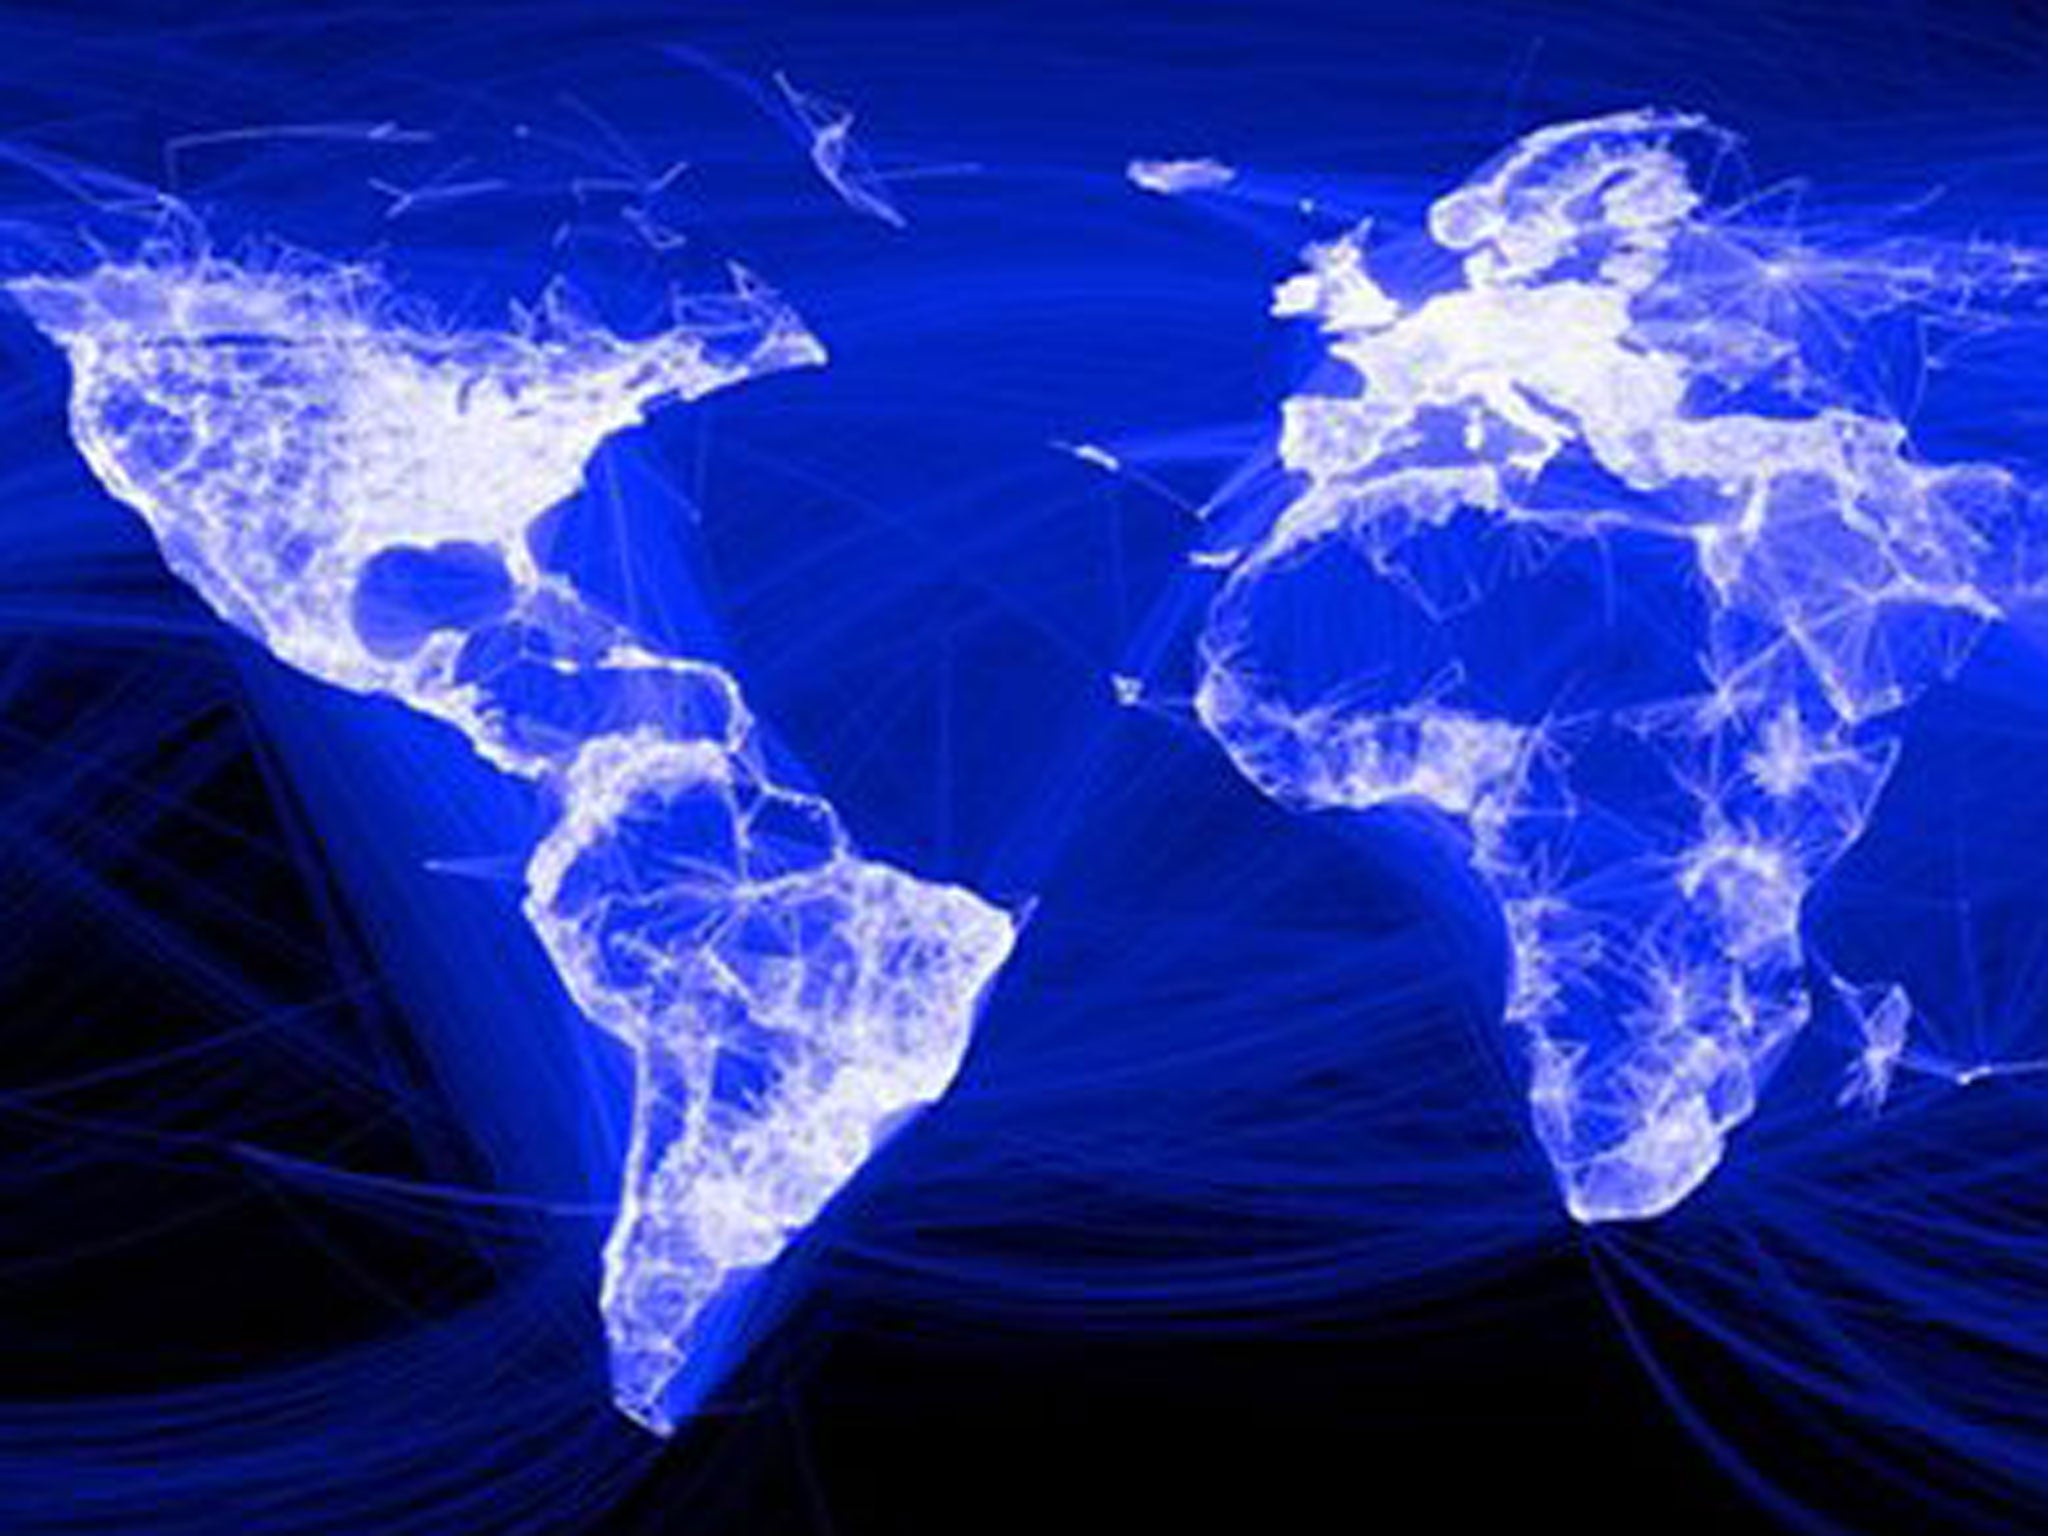 An illustration from Facebook showing the social networks global links. Each blue line represents a friendship.